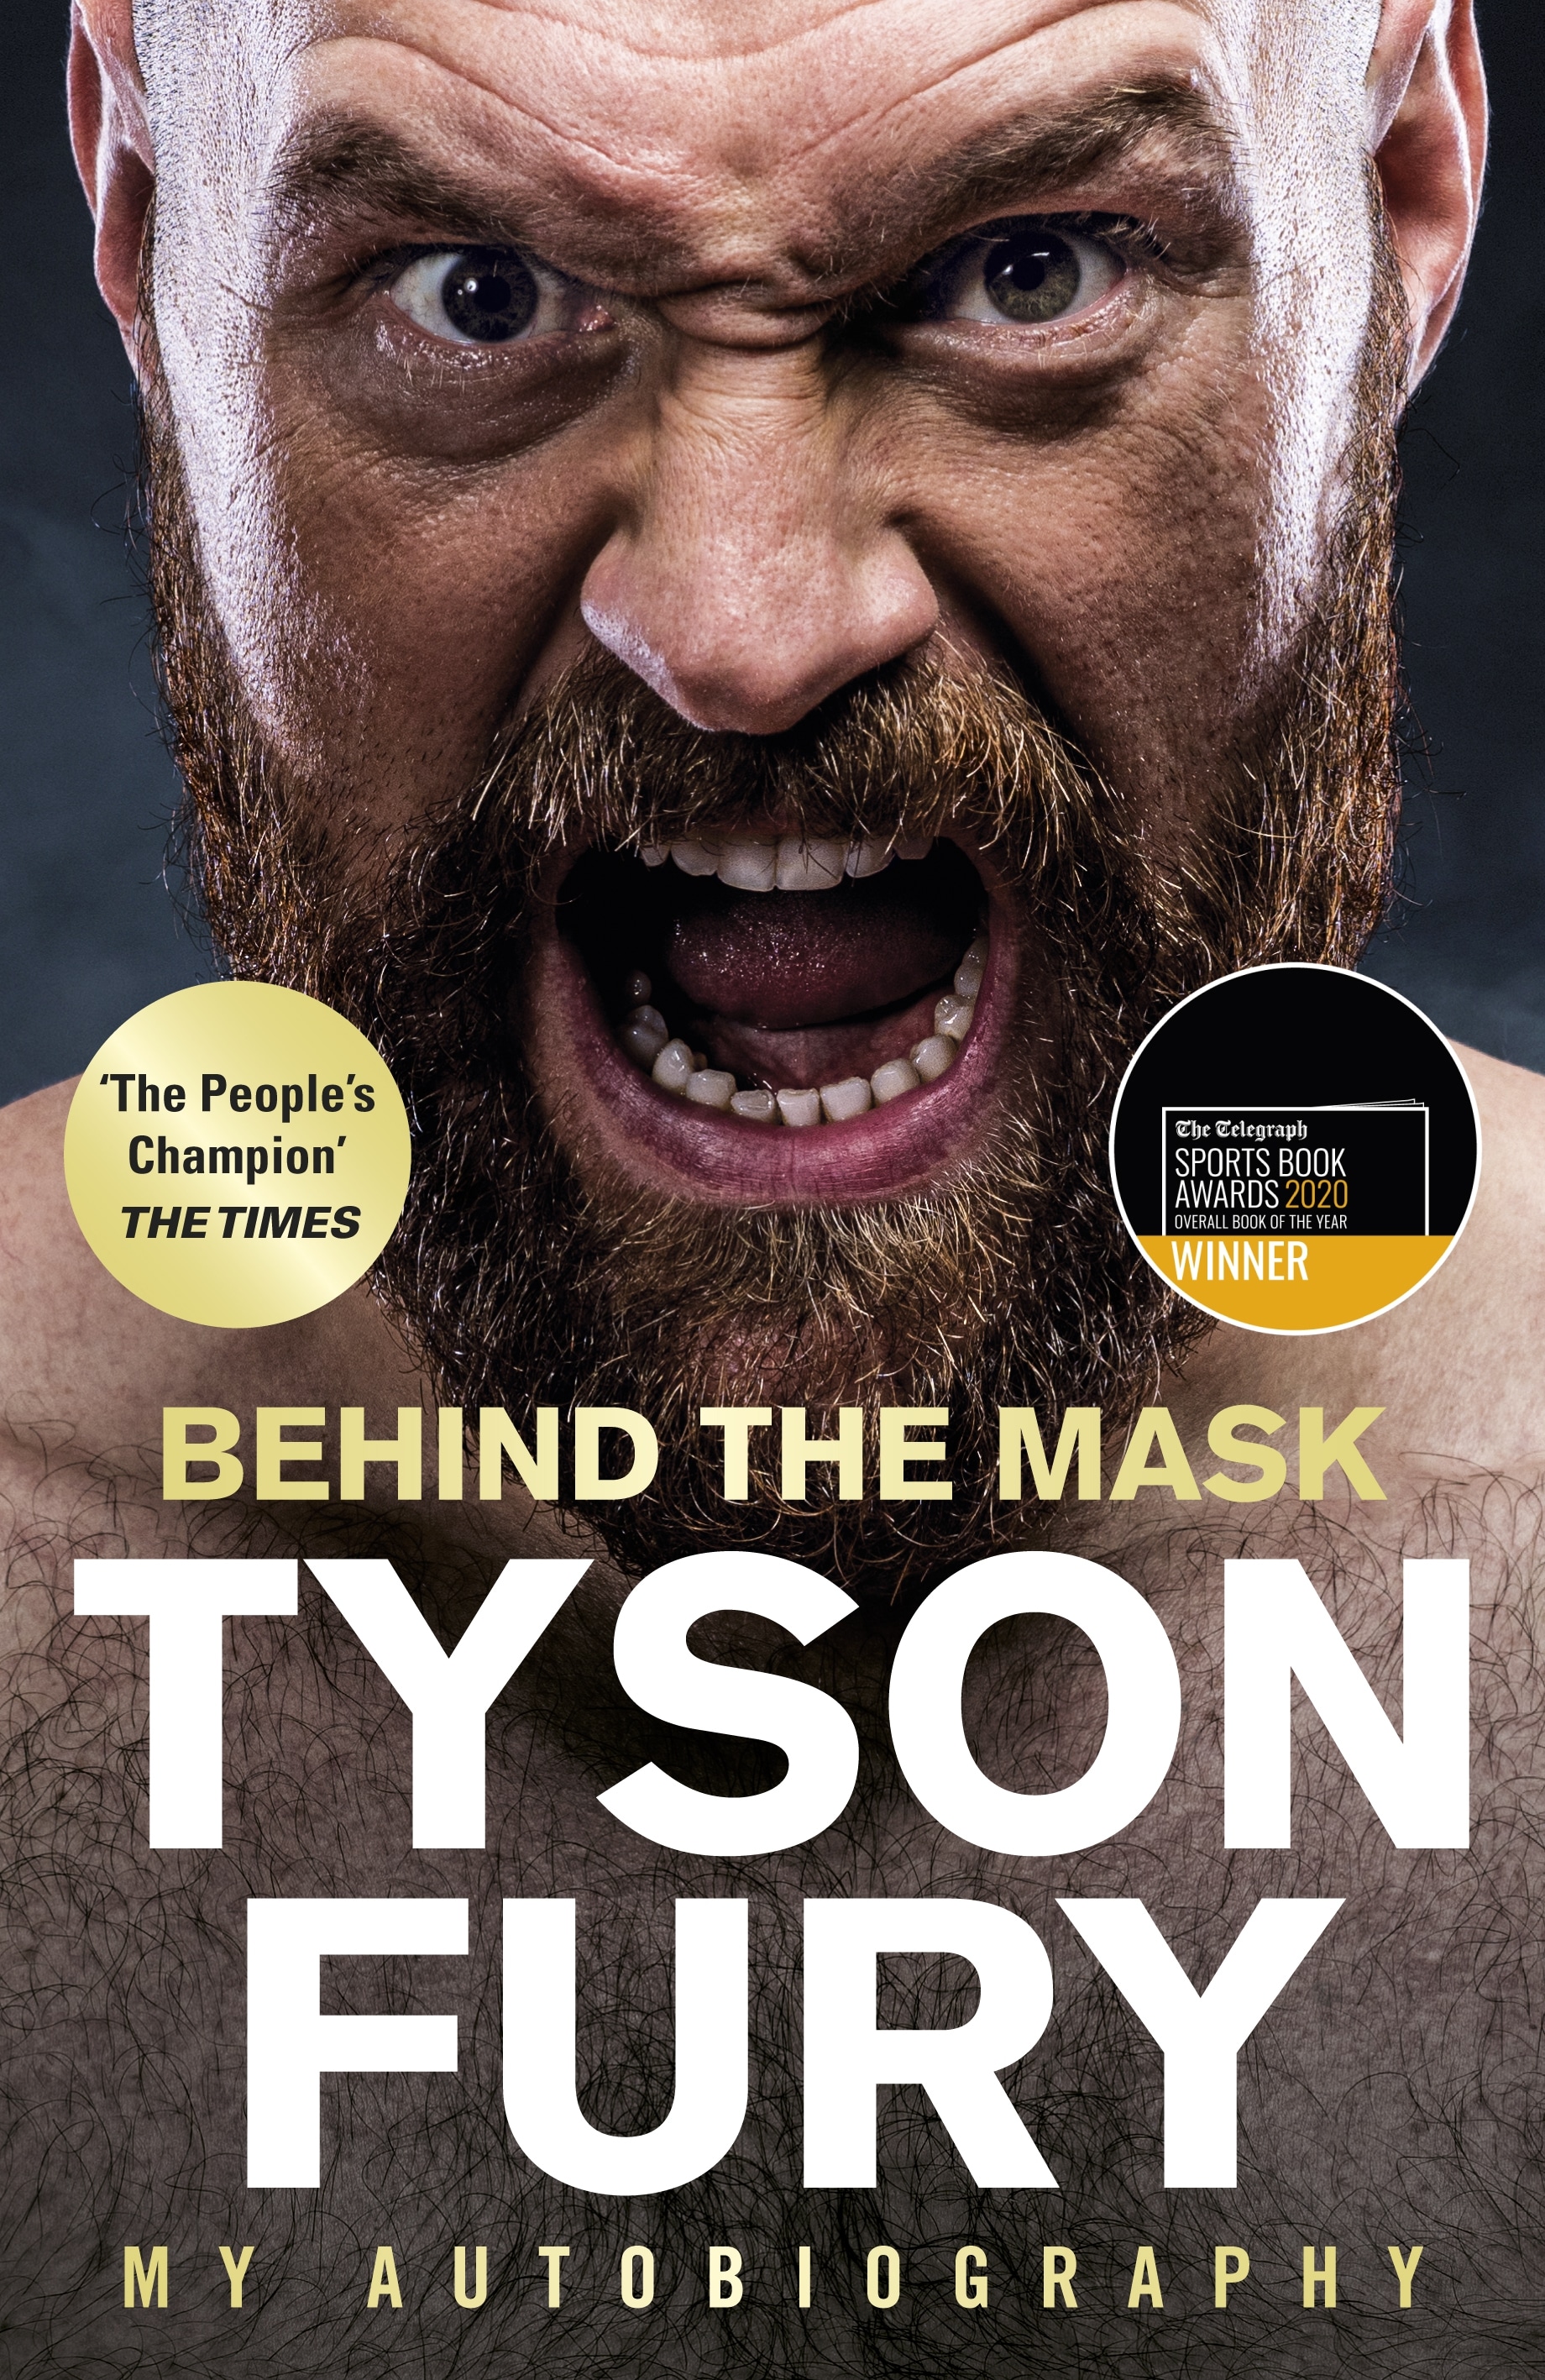 Book “Behind the Mask” by Tyson Fury — November 14, 2019